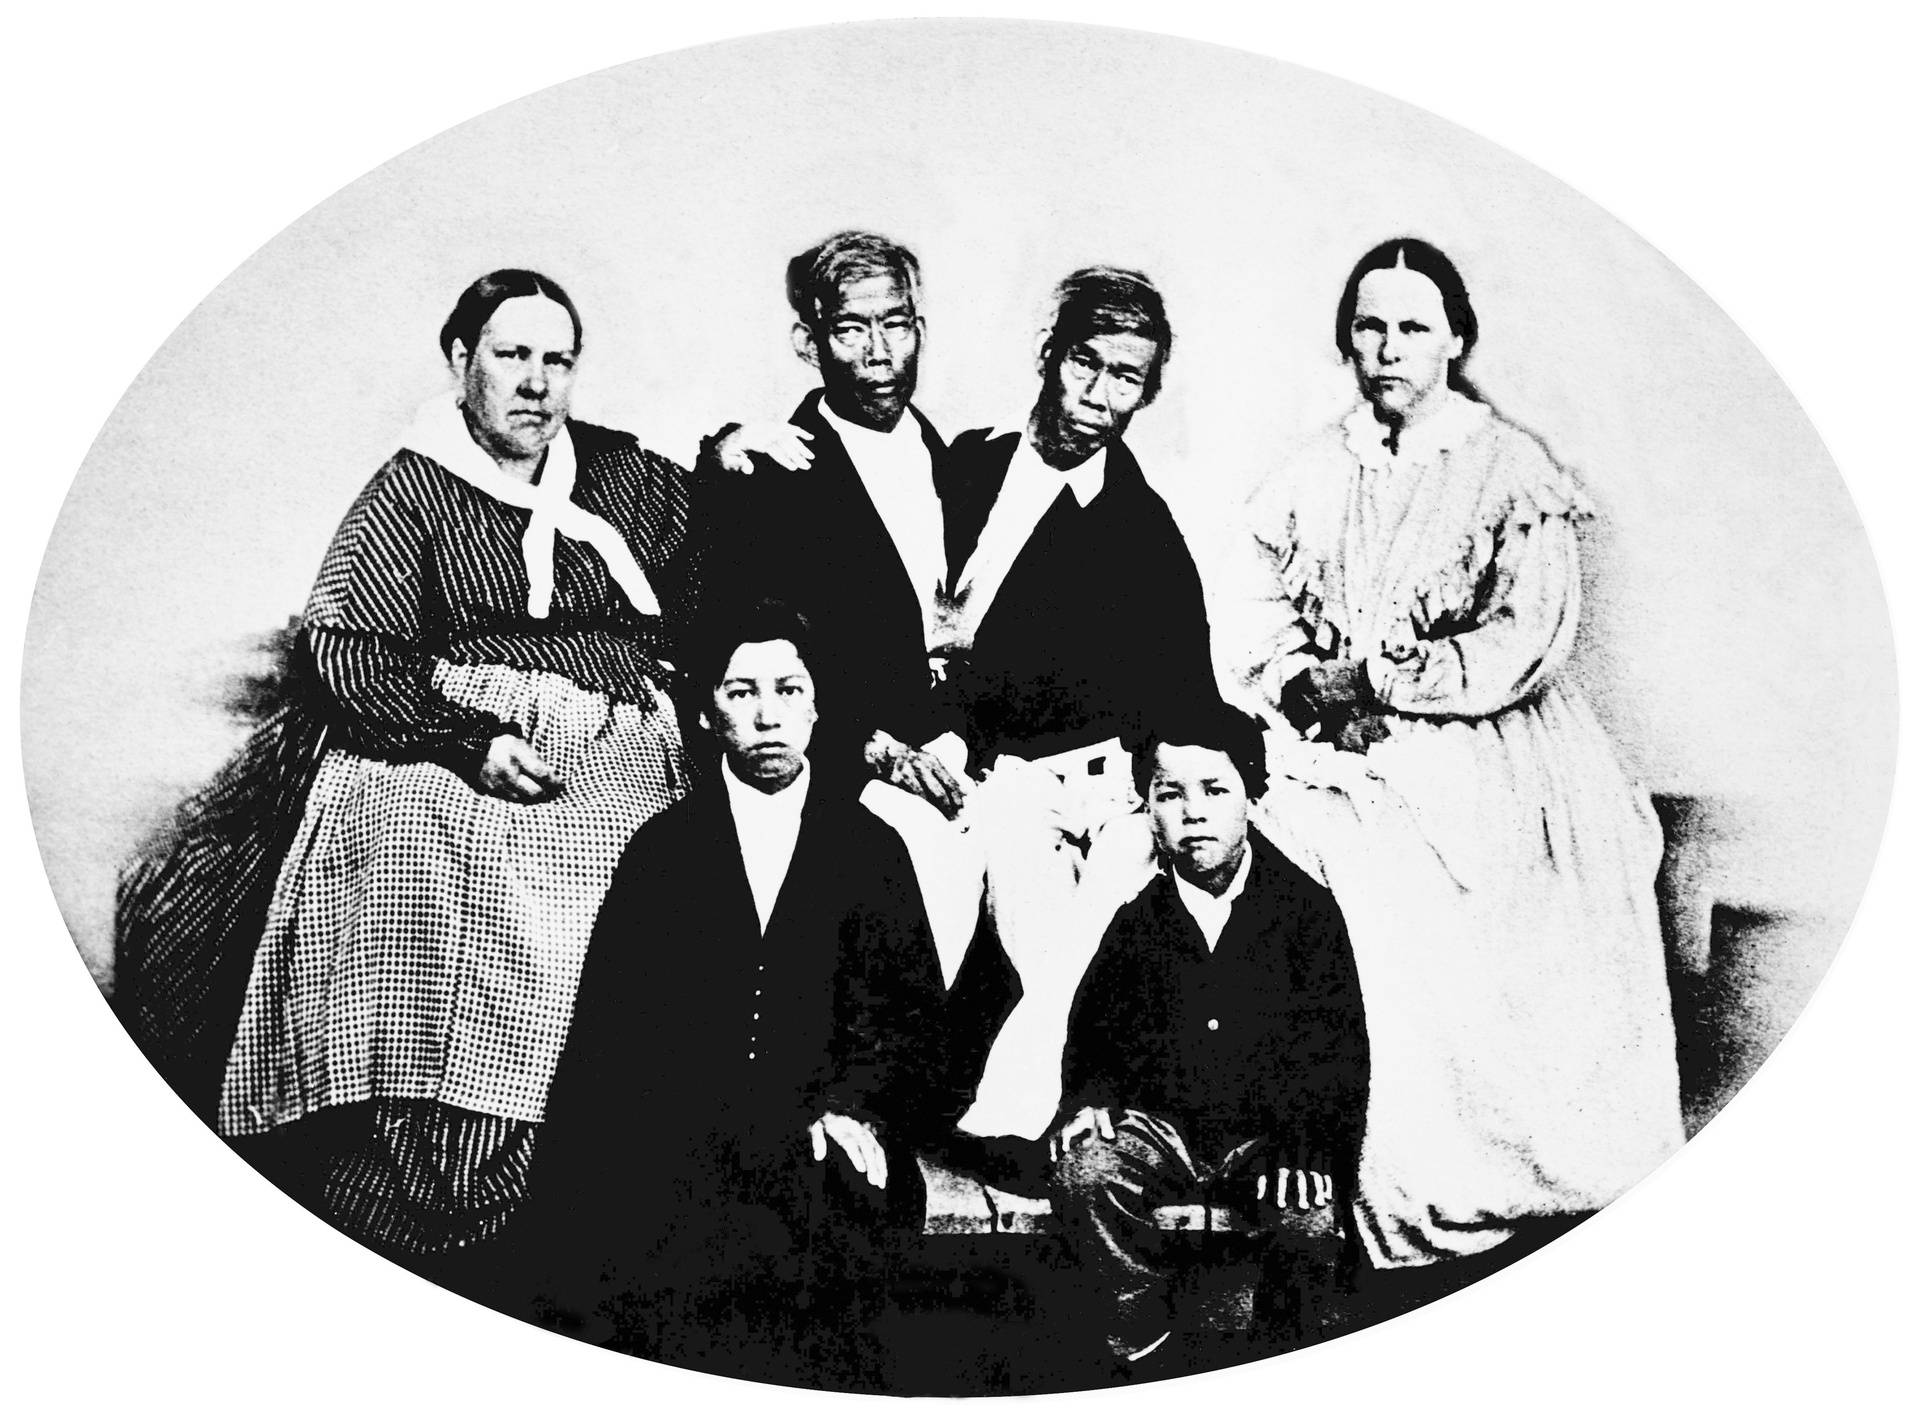 Thailand / USA: Chang and Eng Bunker with family members, 1865. On the right is Chang, his wife Adelaide, and their son Patrick Henry; on the left is Eng, his wife Sarah, and their son Albert